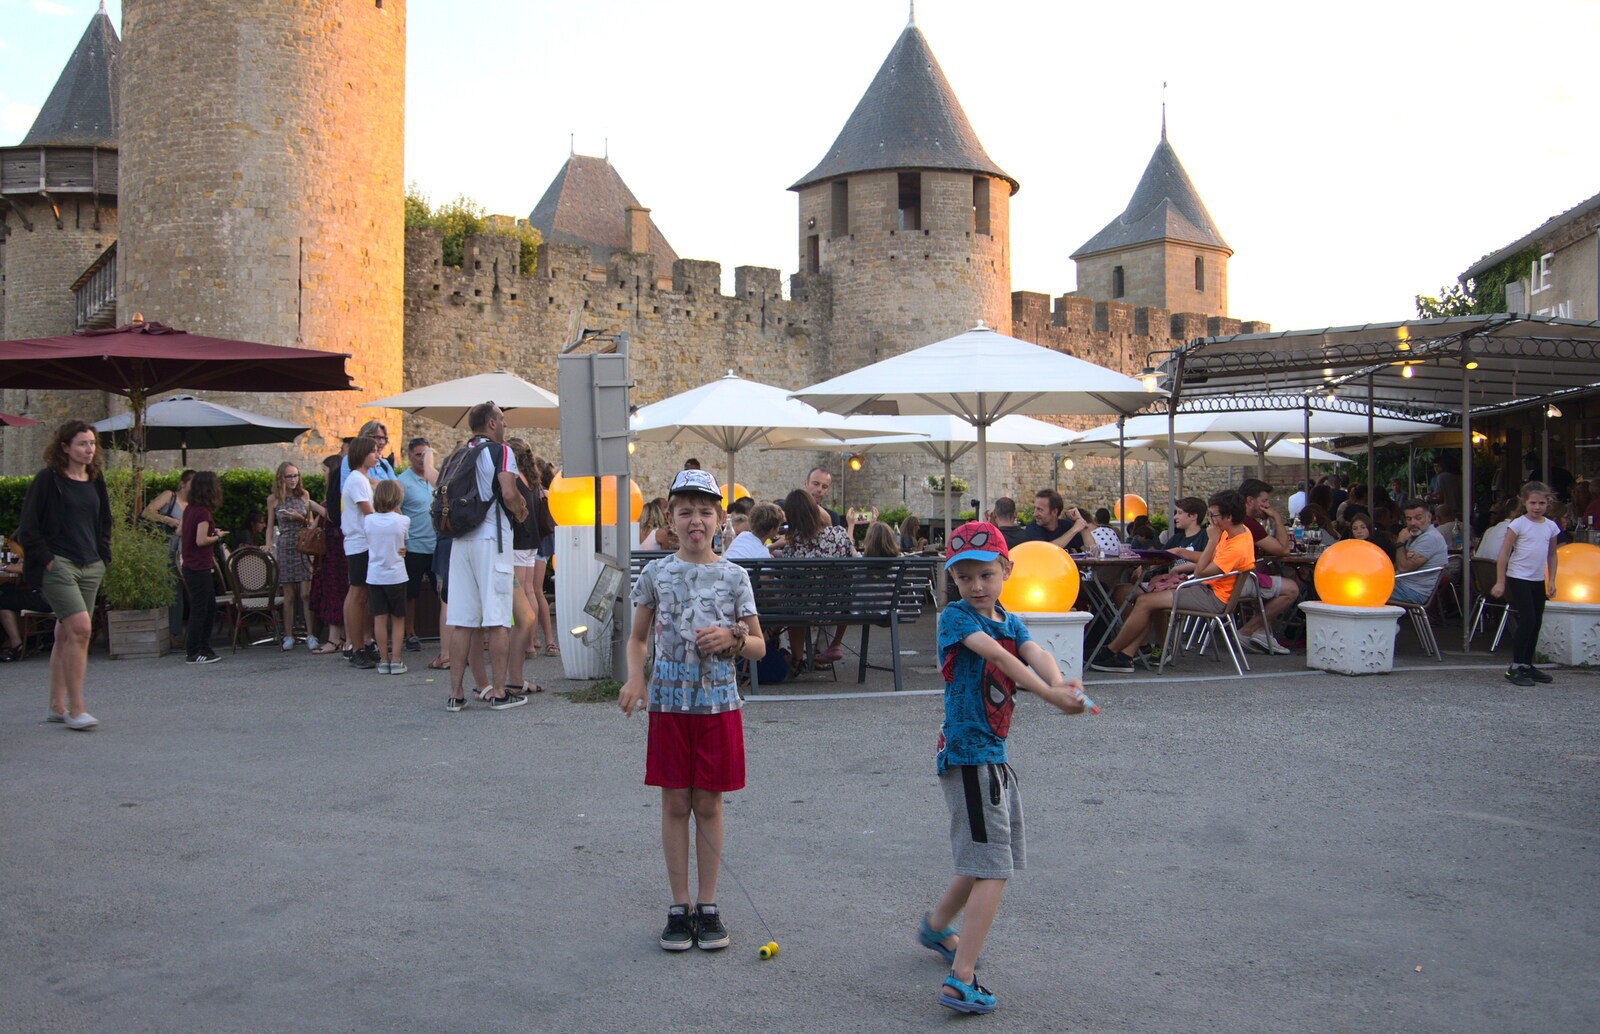 The boys in the square from Abbaye Sainte-Marie de Lagrasse and The Lac de la Cavayère, Aude, France - 10th August